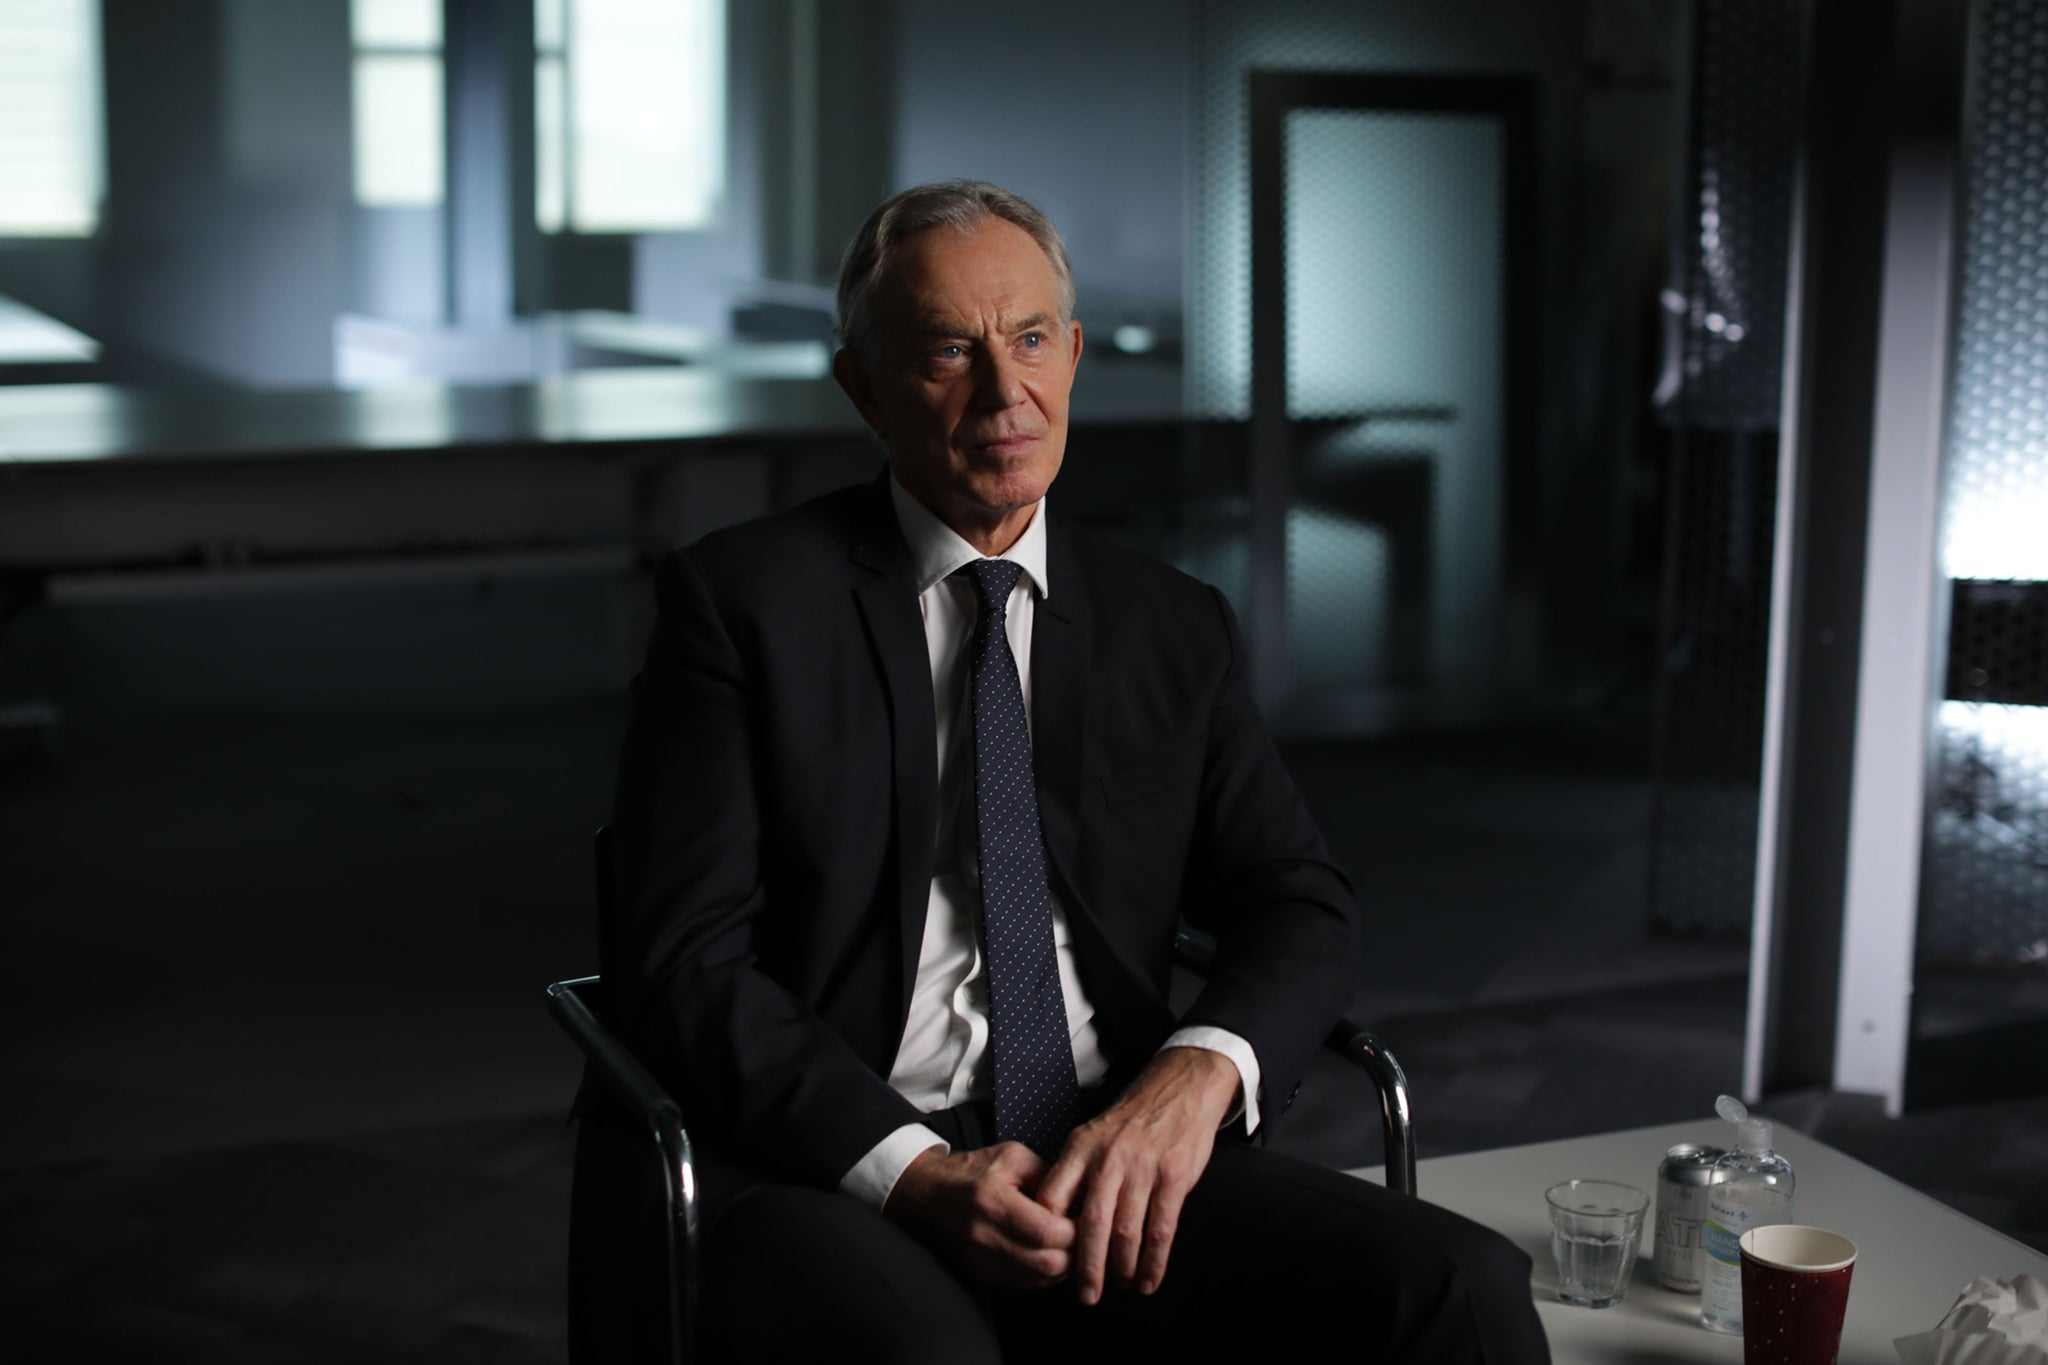 Tony Blair in the BBC series ‘The New Labour Revolution’